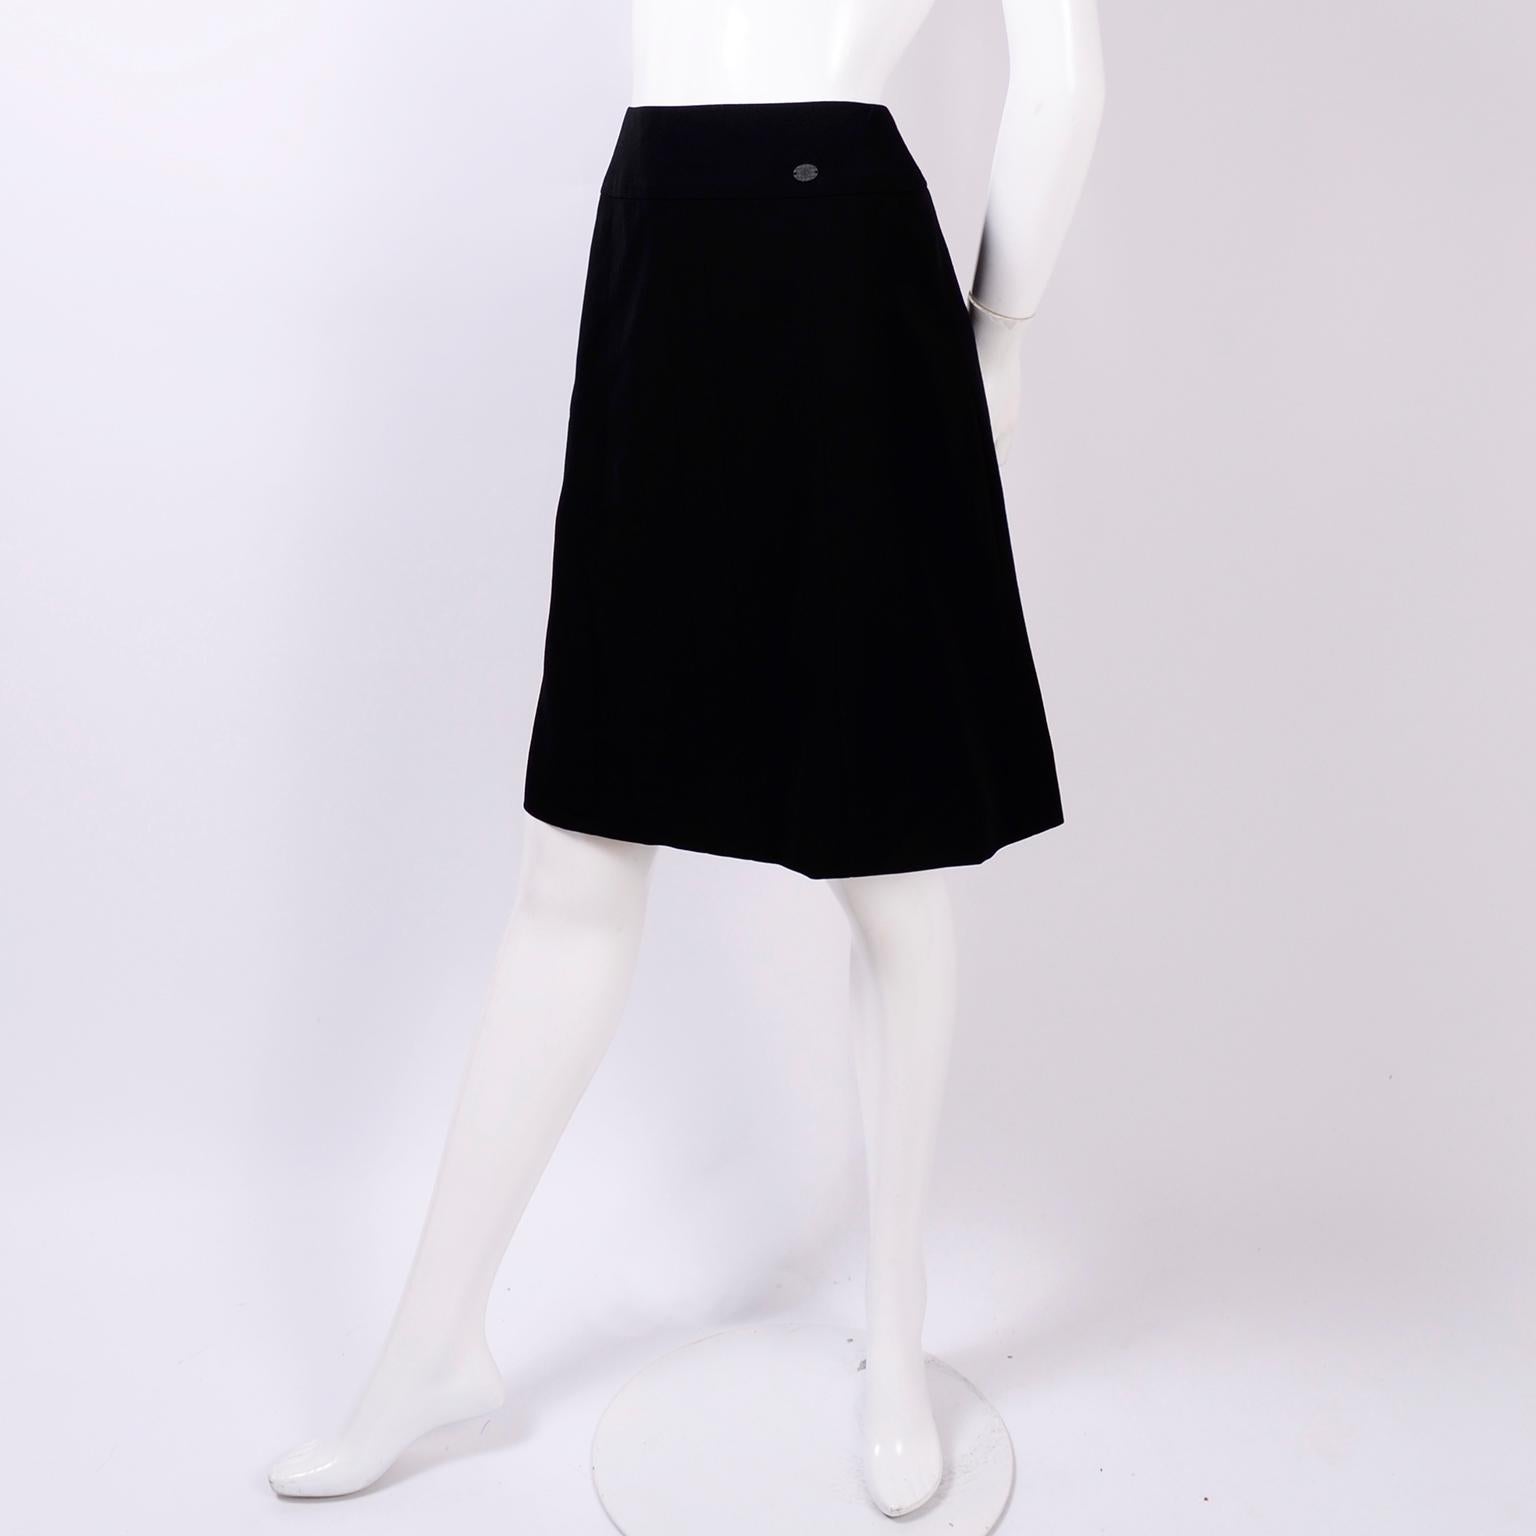 This is a vintage Chanel Spring / Summer 2001 black a-line wool skirt with subtle seams and oval CC logo plate sewn into the waistband. This skirt fits right into the modern aesthetic and can be worn with numerous separates you already have in your